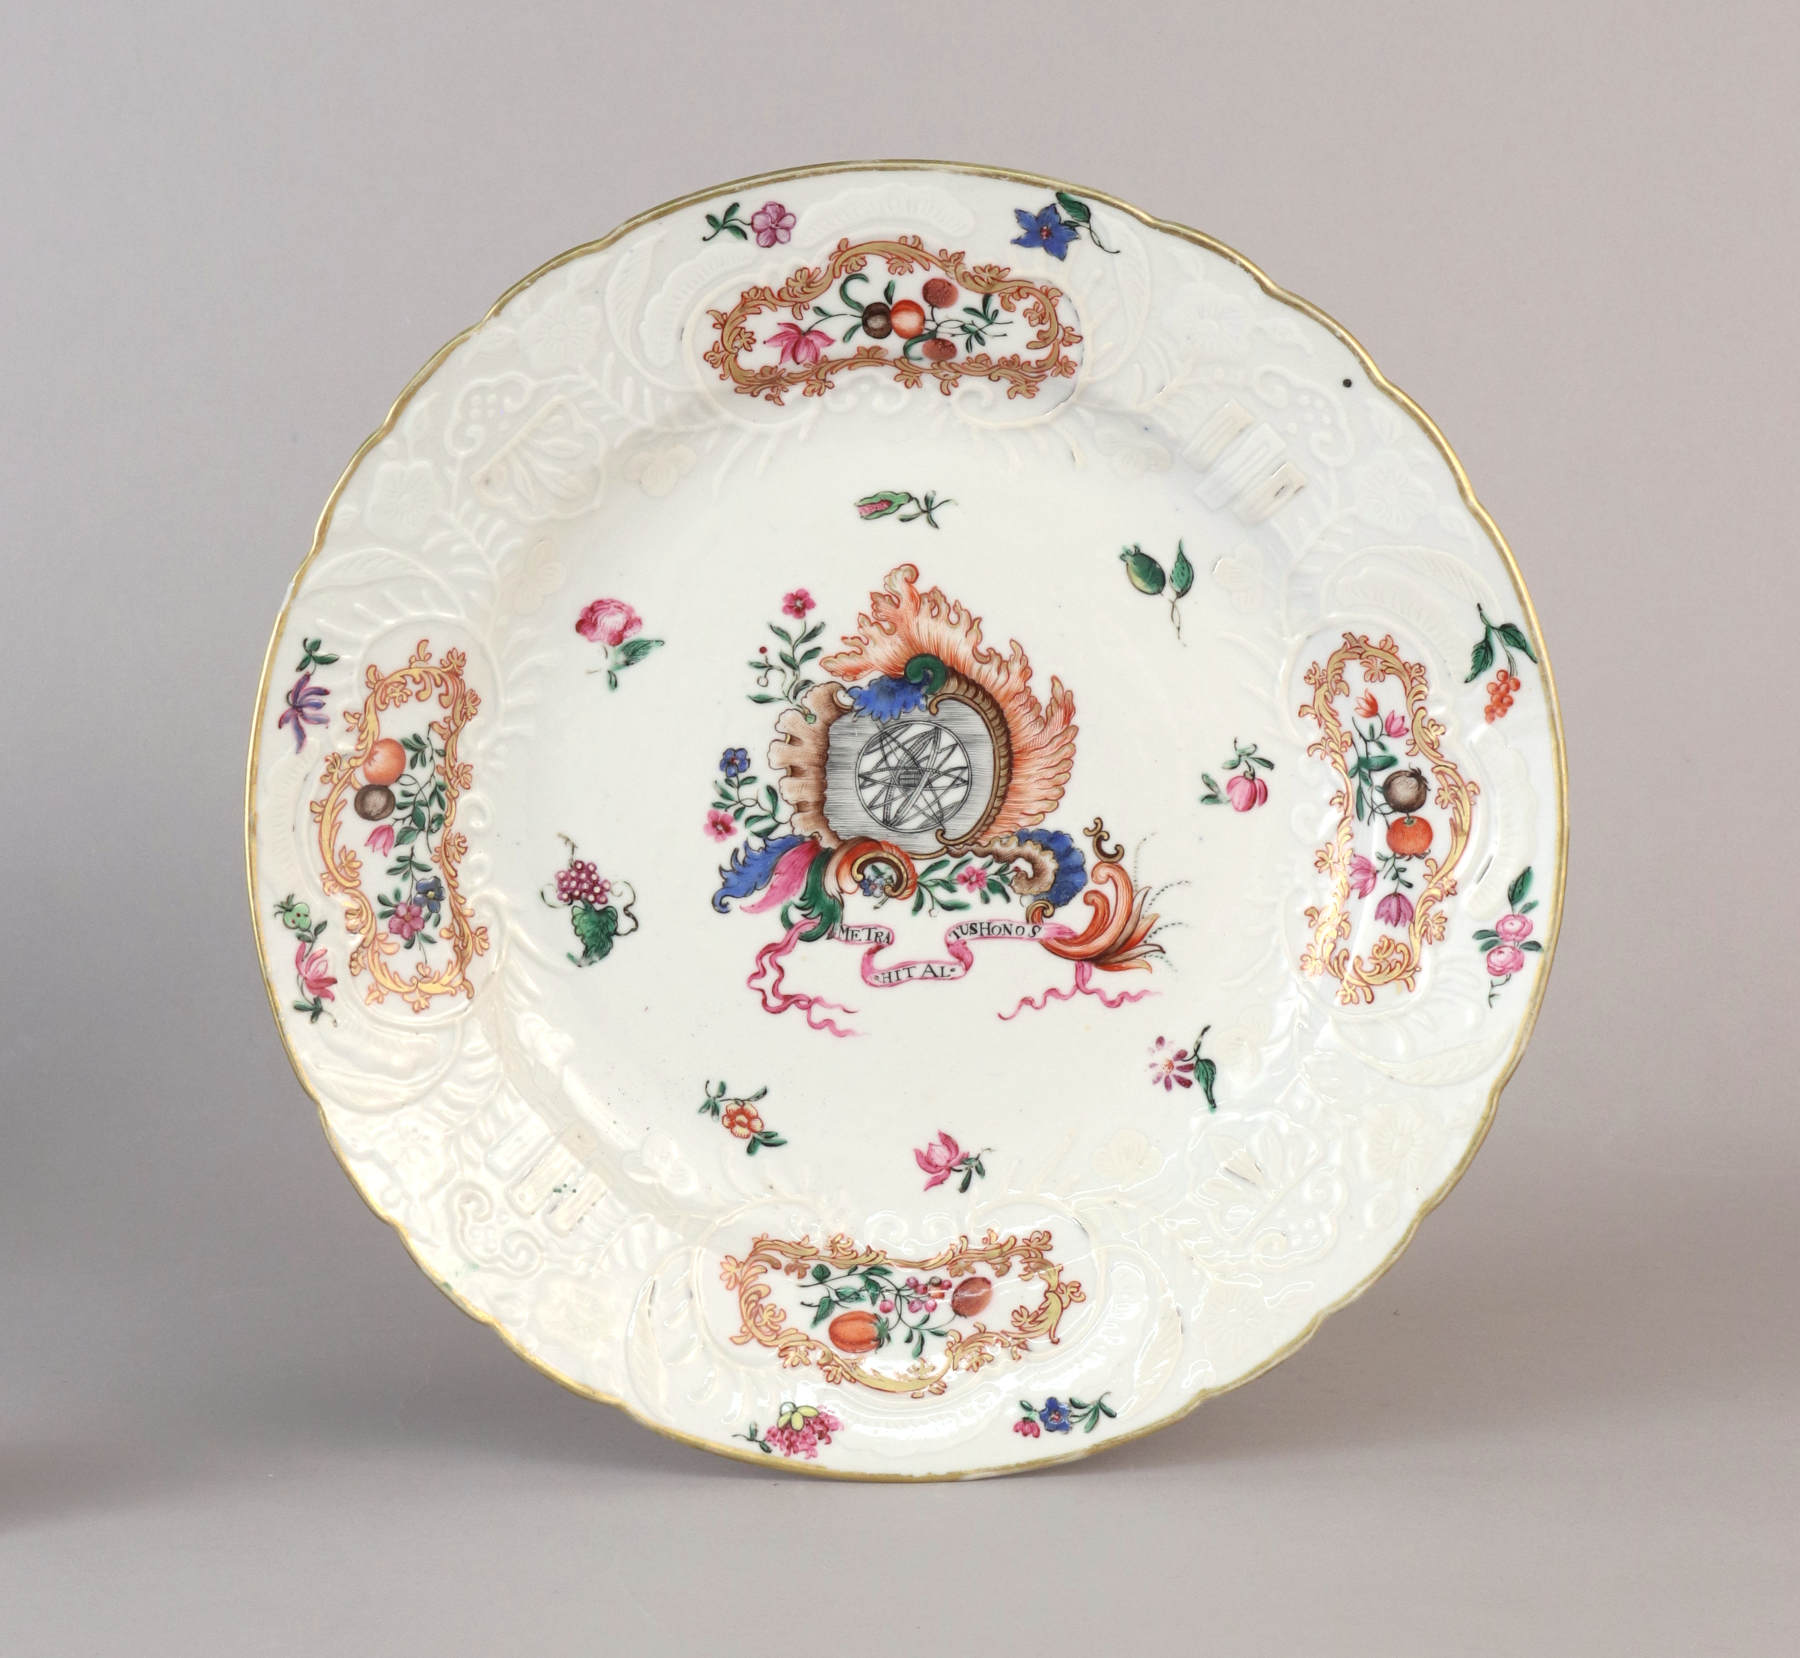 Chinese Export Porcelain Armorial Plate, c. 1760